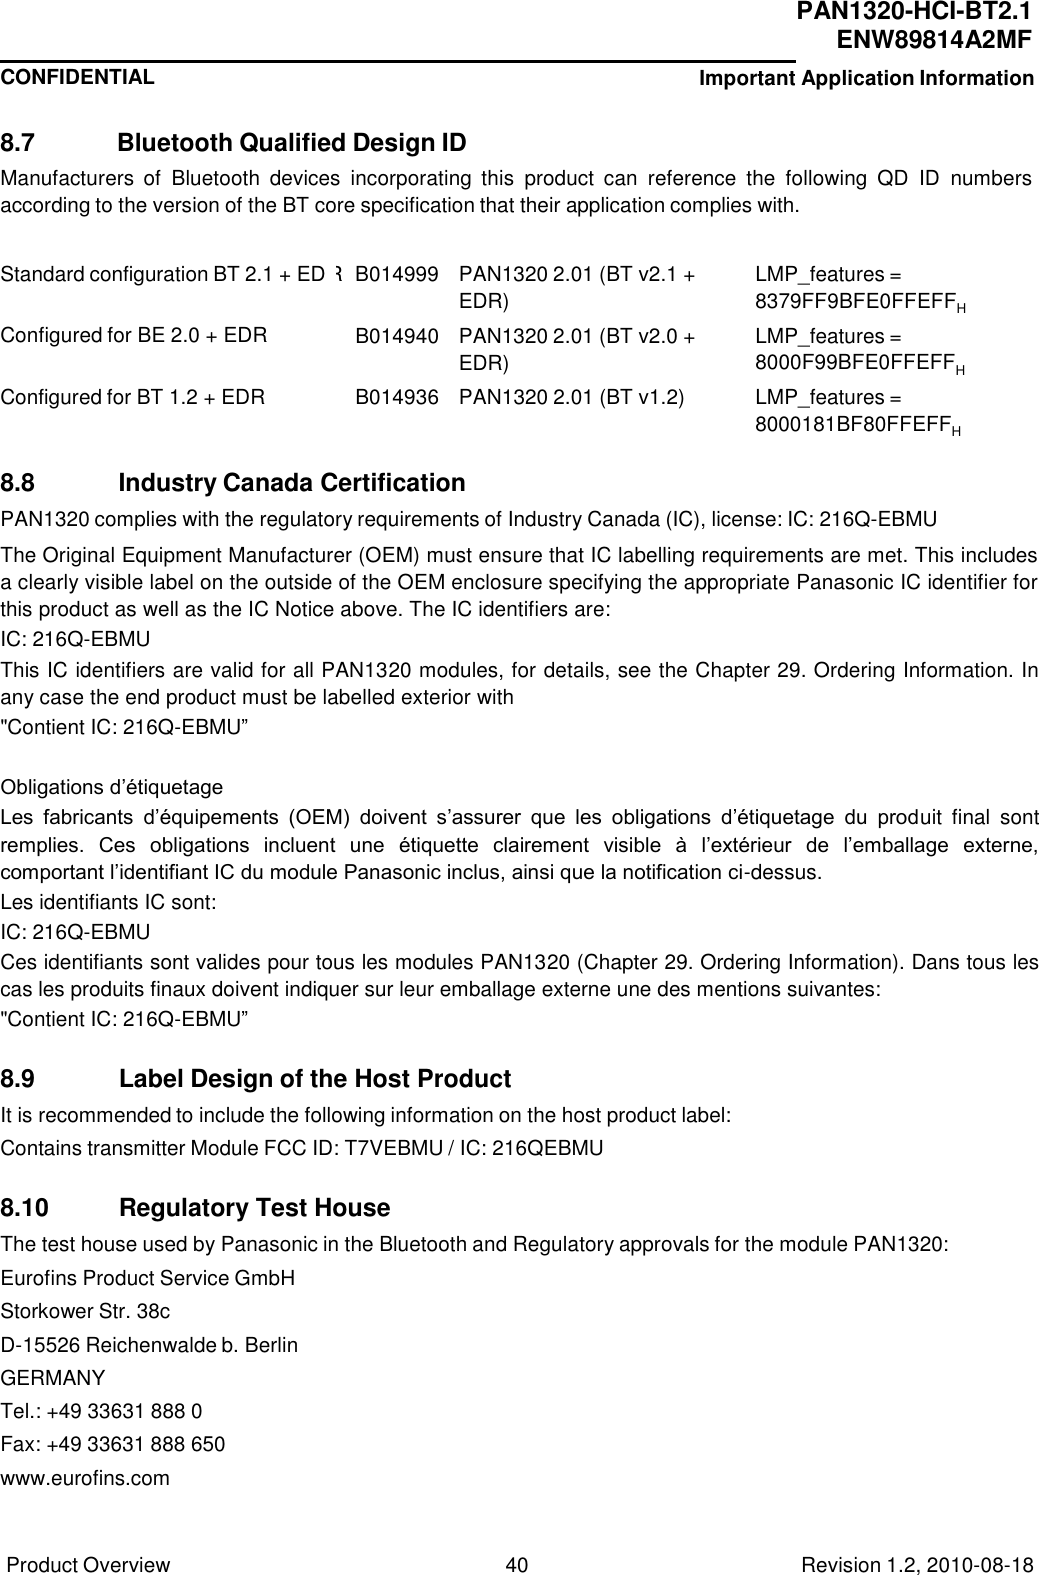  PAN1320-HCI-BT2.1 ENW89814A2MF CONFIDENTIAL Important Application Information Product Overview 40 Revision 1.2, 2010-08-18   R  B014999 PAN1320 2.01 (BT v2.1 + EDR) LMP_features = 8379FF9BFE0FFEFFH B014940 PAN1320 2.01 (BT v2.0 + EDR) LMP_features = 8000F99BFE0FFEFFH B014936 PAN1320 2.01 (BT v1.2) LMP_features = 8000181BF80FFEFFH    8.7  Bluetooth Qualified Design ID Manufacturers  of  Bluetooth  devices  incorporating  this  product  can  reference  the  following  QD  ID  numbers according to the version of the BT core specification that their application complies with.   Standard configuration BT 2.1 + ED   Configured for BE 2.0 + EDR   Configured for BT 1.2 + EDR    8.8            Industry Canada Certification PAN1320 complies with the regulatory requirements of Industry Canada (IC), license: IC: 216Q-EBMU  The Original Equipment Manufacturer (OEM) must ensure that IC labelling requirements are met. This includes a clearly visible label on the outside of the OEM enclosure specifying the appropriate Panasonic IC identifier for this product as well as the IC Notice above. The IC identifiers are: IC: 216Q-EBMU  This IC identifiers are valid for all PAN1320 modules, for details, see the Chapter 29. Ordering Information. In any case the end product must be labelled exterior with &quot;Contient IC: 216Q-EBMU”    Obligations d’étiquetage Les  fabricants  d’équipements  (OEM)  doivent  s’assurer  que  les  obligations  d’étiquetage  du  produit  final  sont remplies.  Ces  obligations  incluent  une  étiquette  clairement  visible  à  l’extérieur  de  l’emballage  externe, comportant l’identifiant IC du module Panasonic inclus, ainsi que la notification ci-dessus. Les identifiants IC sont: IC: 216Q-EBMU  Ces identifiants sont valides pour tous les modules PAN1320 (Chapter 29. Ordering Information). Dans tous les cas les produits finaux doivent indiquer sur leur emballage externe une des mentions suivantes: &quot;Contient IC: 216Q-EBMU”    8.9            Label Design of the Host Product It is recommended to include the following information on the host product label: Contains transmitter Module FCC ID: T7VEBMU / IC: 216QEBMU  8.10          Regulatory Test House The test house used by Panasonic in the Bluetooth and Regulatory approvals for the module PAN1320: Eurofins Product Service GmbH Storkower Str. 38c D-15526 Reichenwalde b. Berlin GERMANY Tel.: +49 33631 888 0 Fax: +49 33631 888 650 www.eurofins.com 